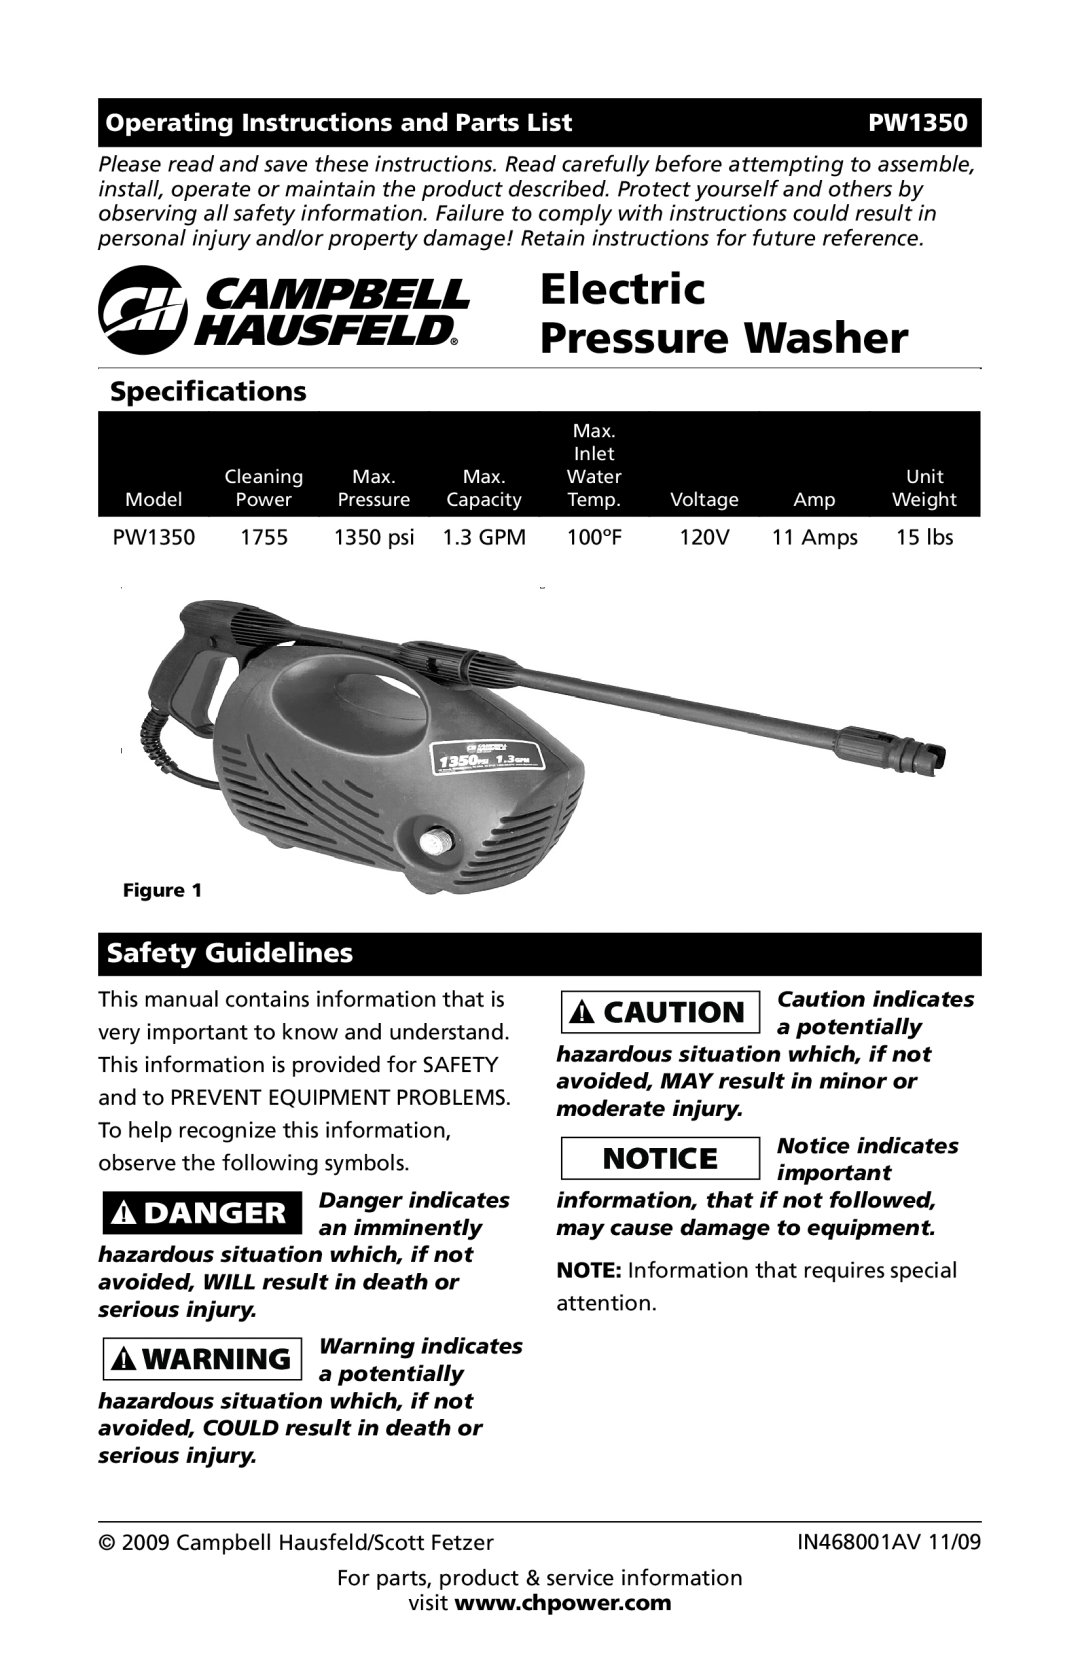 Campbell Hausfeld IN468001AV specifications Electric Pressure Washer, Specifications, Safety Guidelines, PW1350 